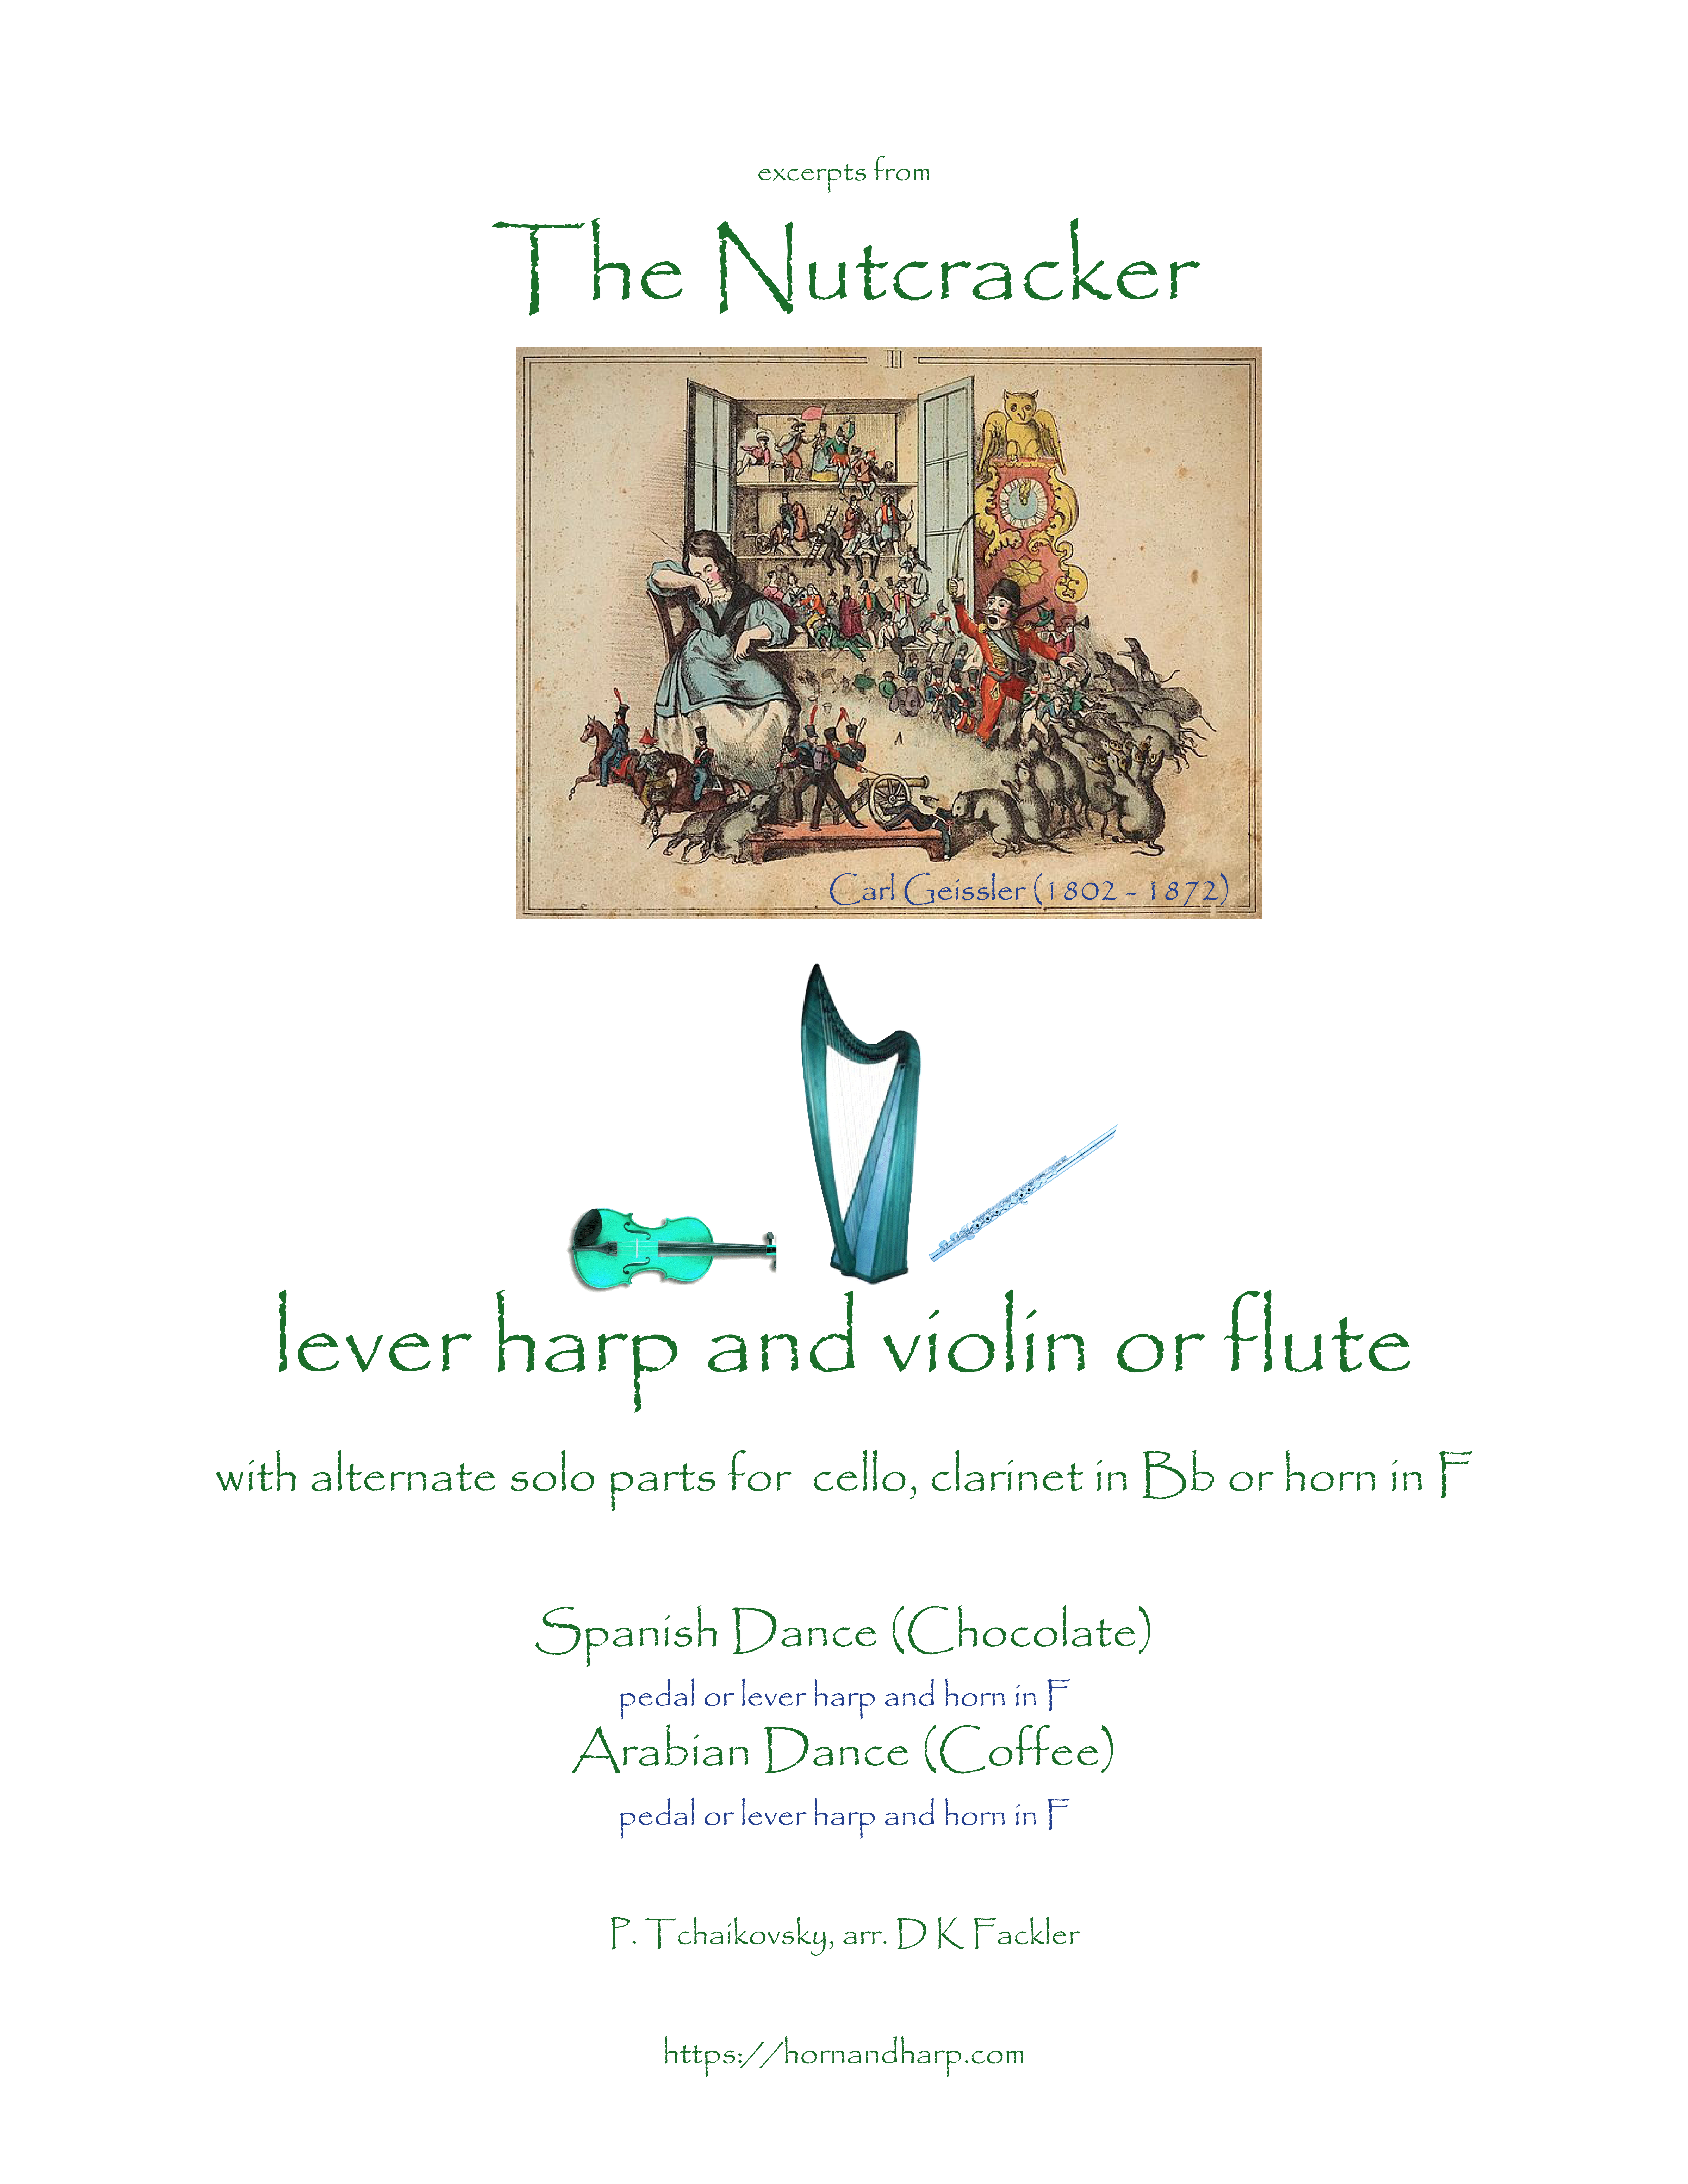 Spanish Dance from Nutcracker for flute solo with harp accompaniment